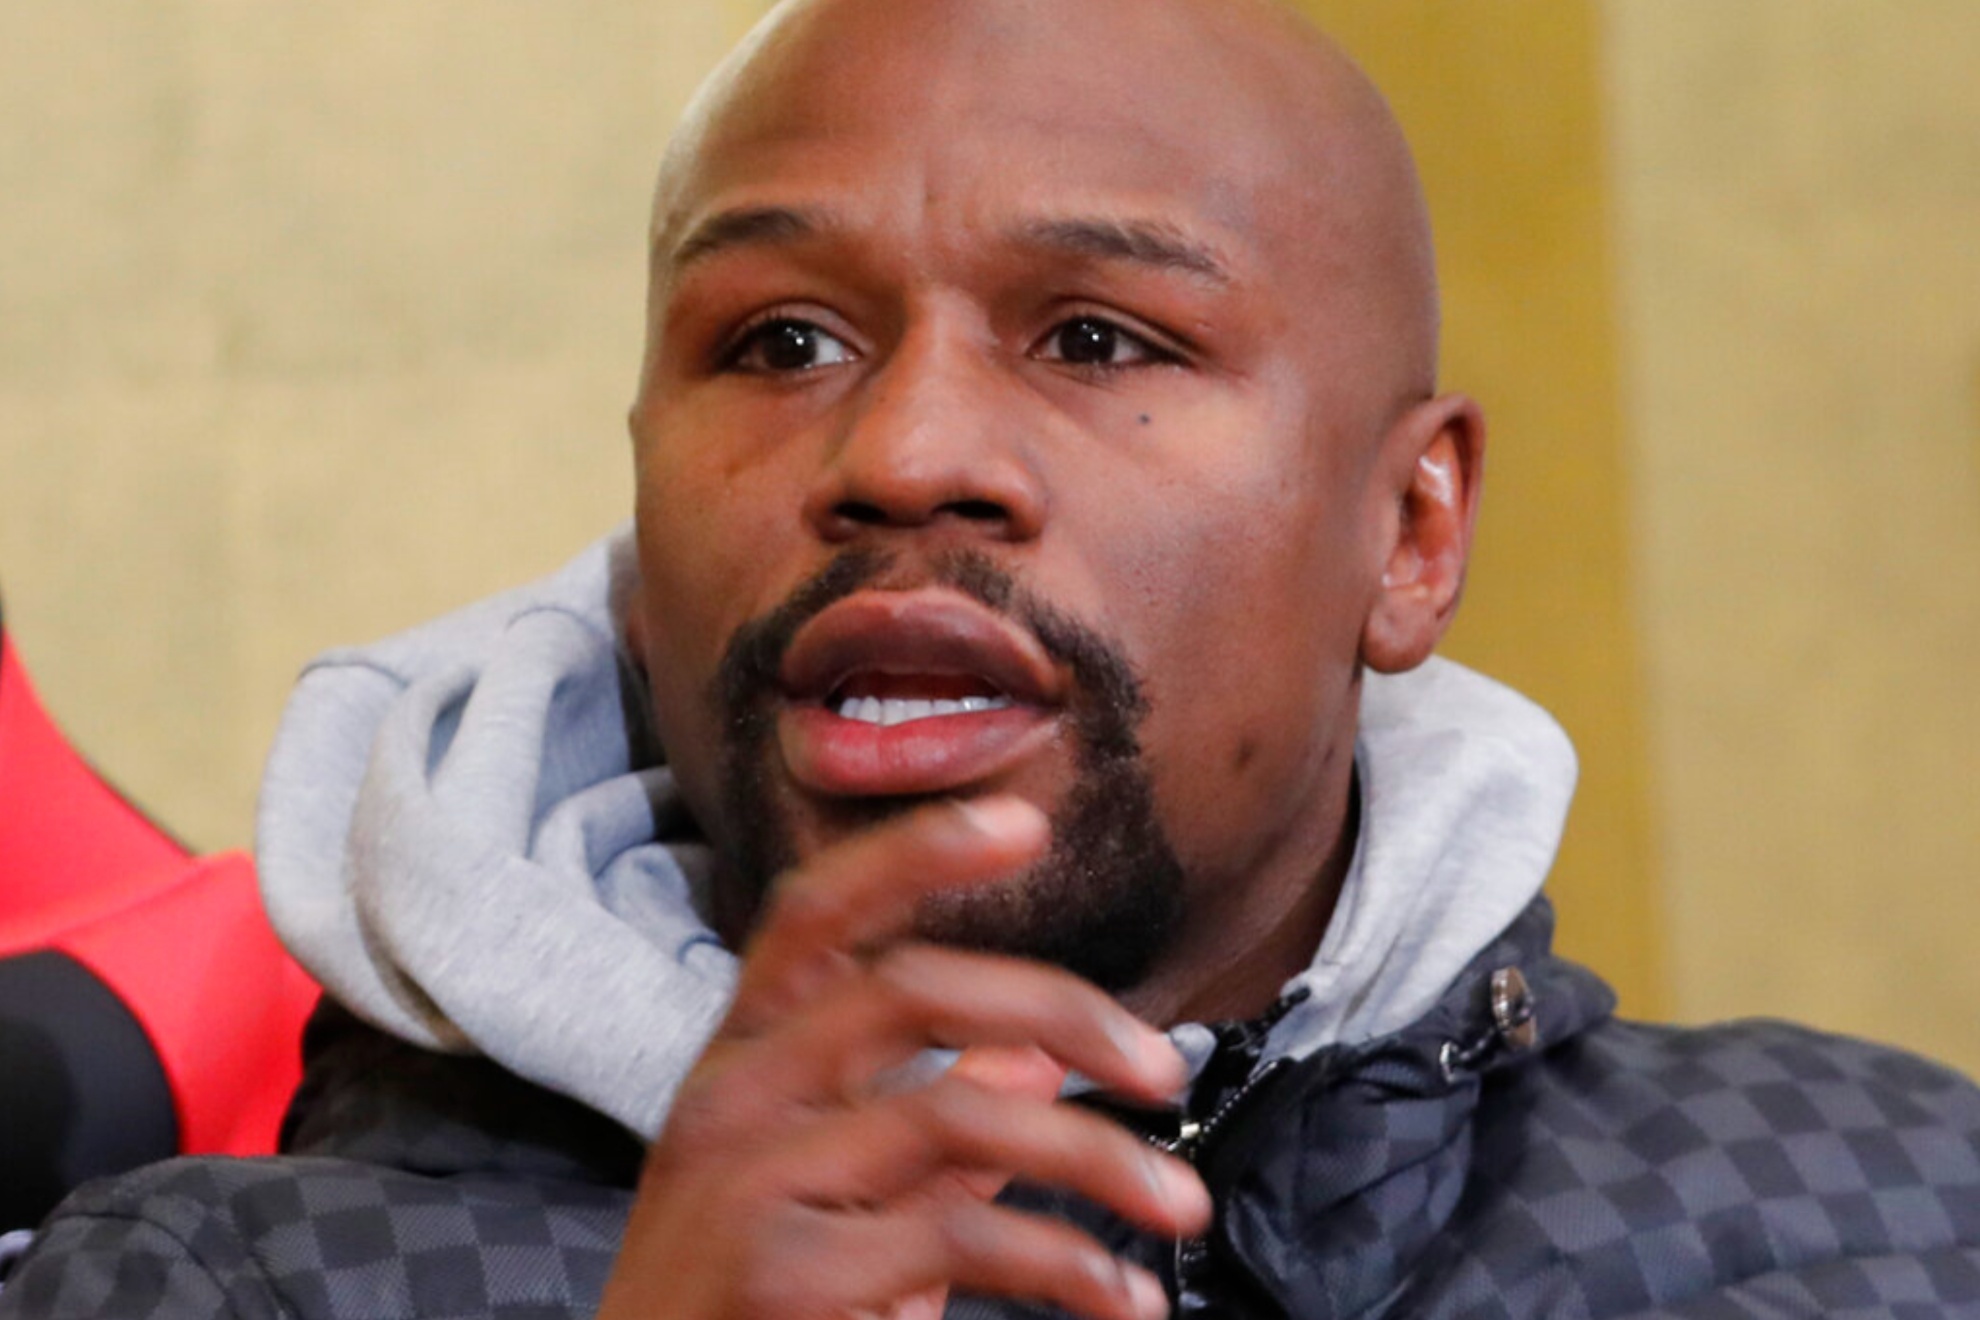 Floyd Mayweather was recently in India promoting his health and wellness brand